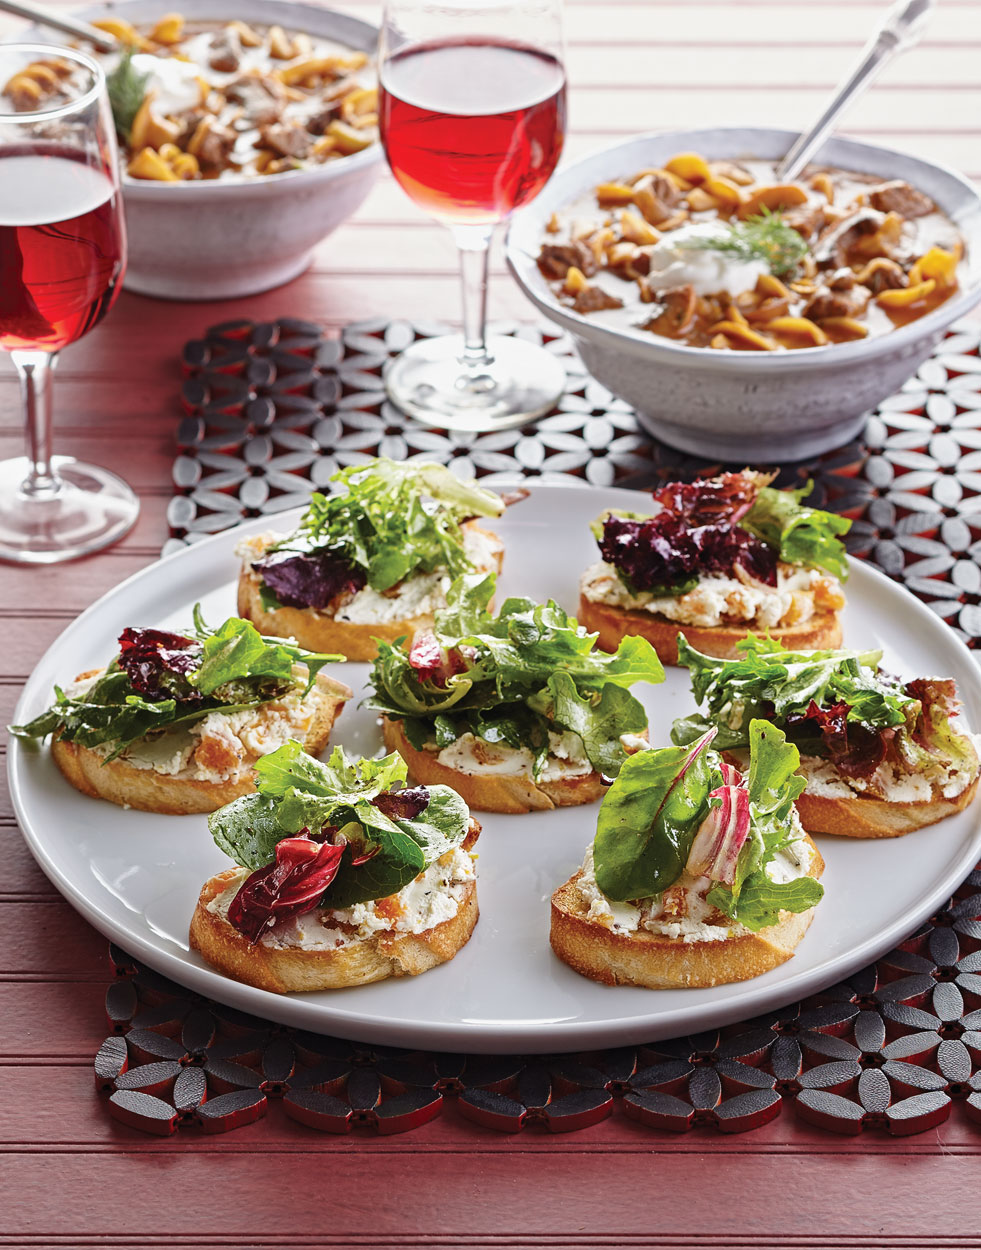 Goat Cheese & Apricot Tartines with Mixed Greens